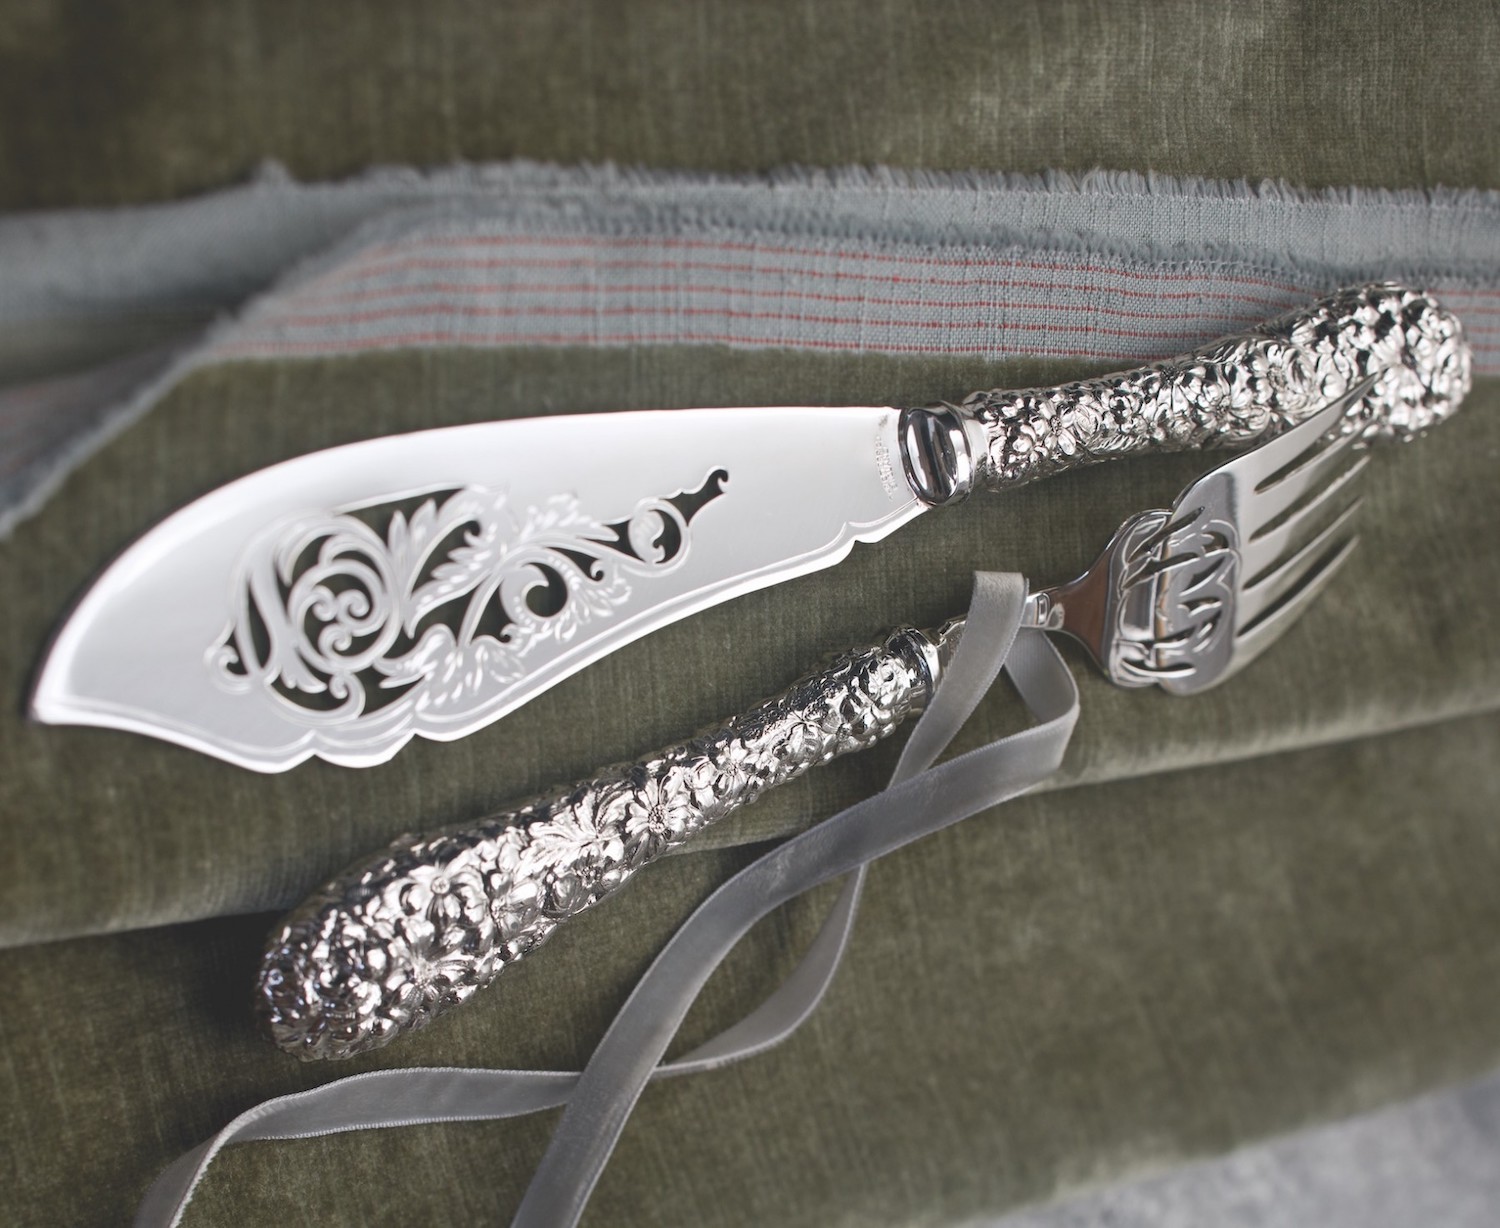 Repoussé flatware for serving fish shows of intricate pierced detailing on the blade and tines (Kirk Stieff).